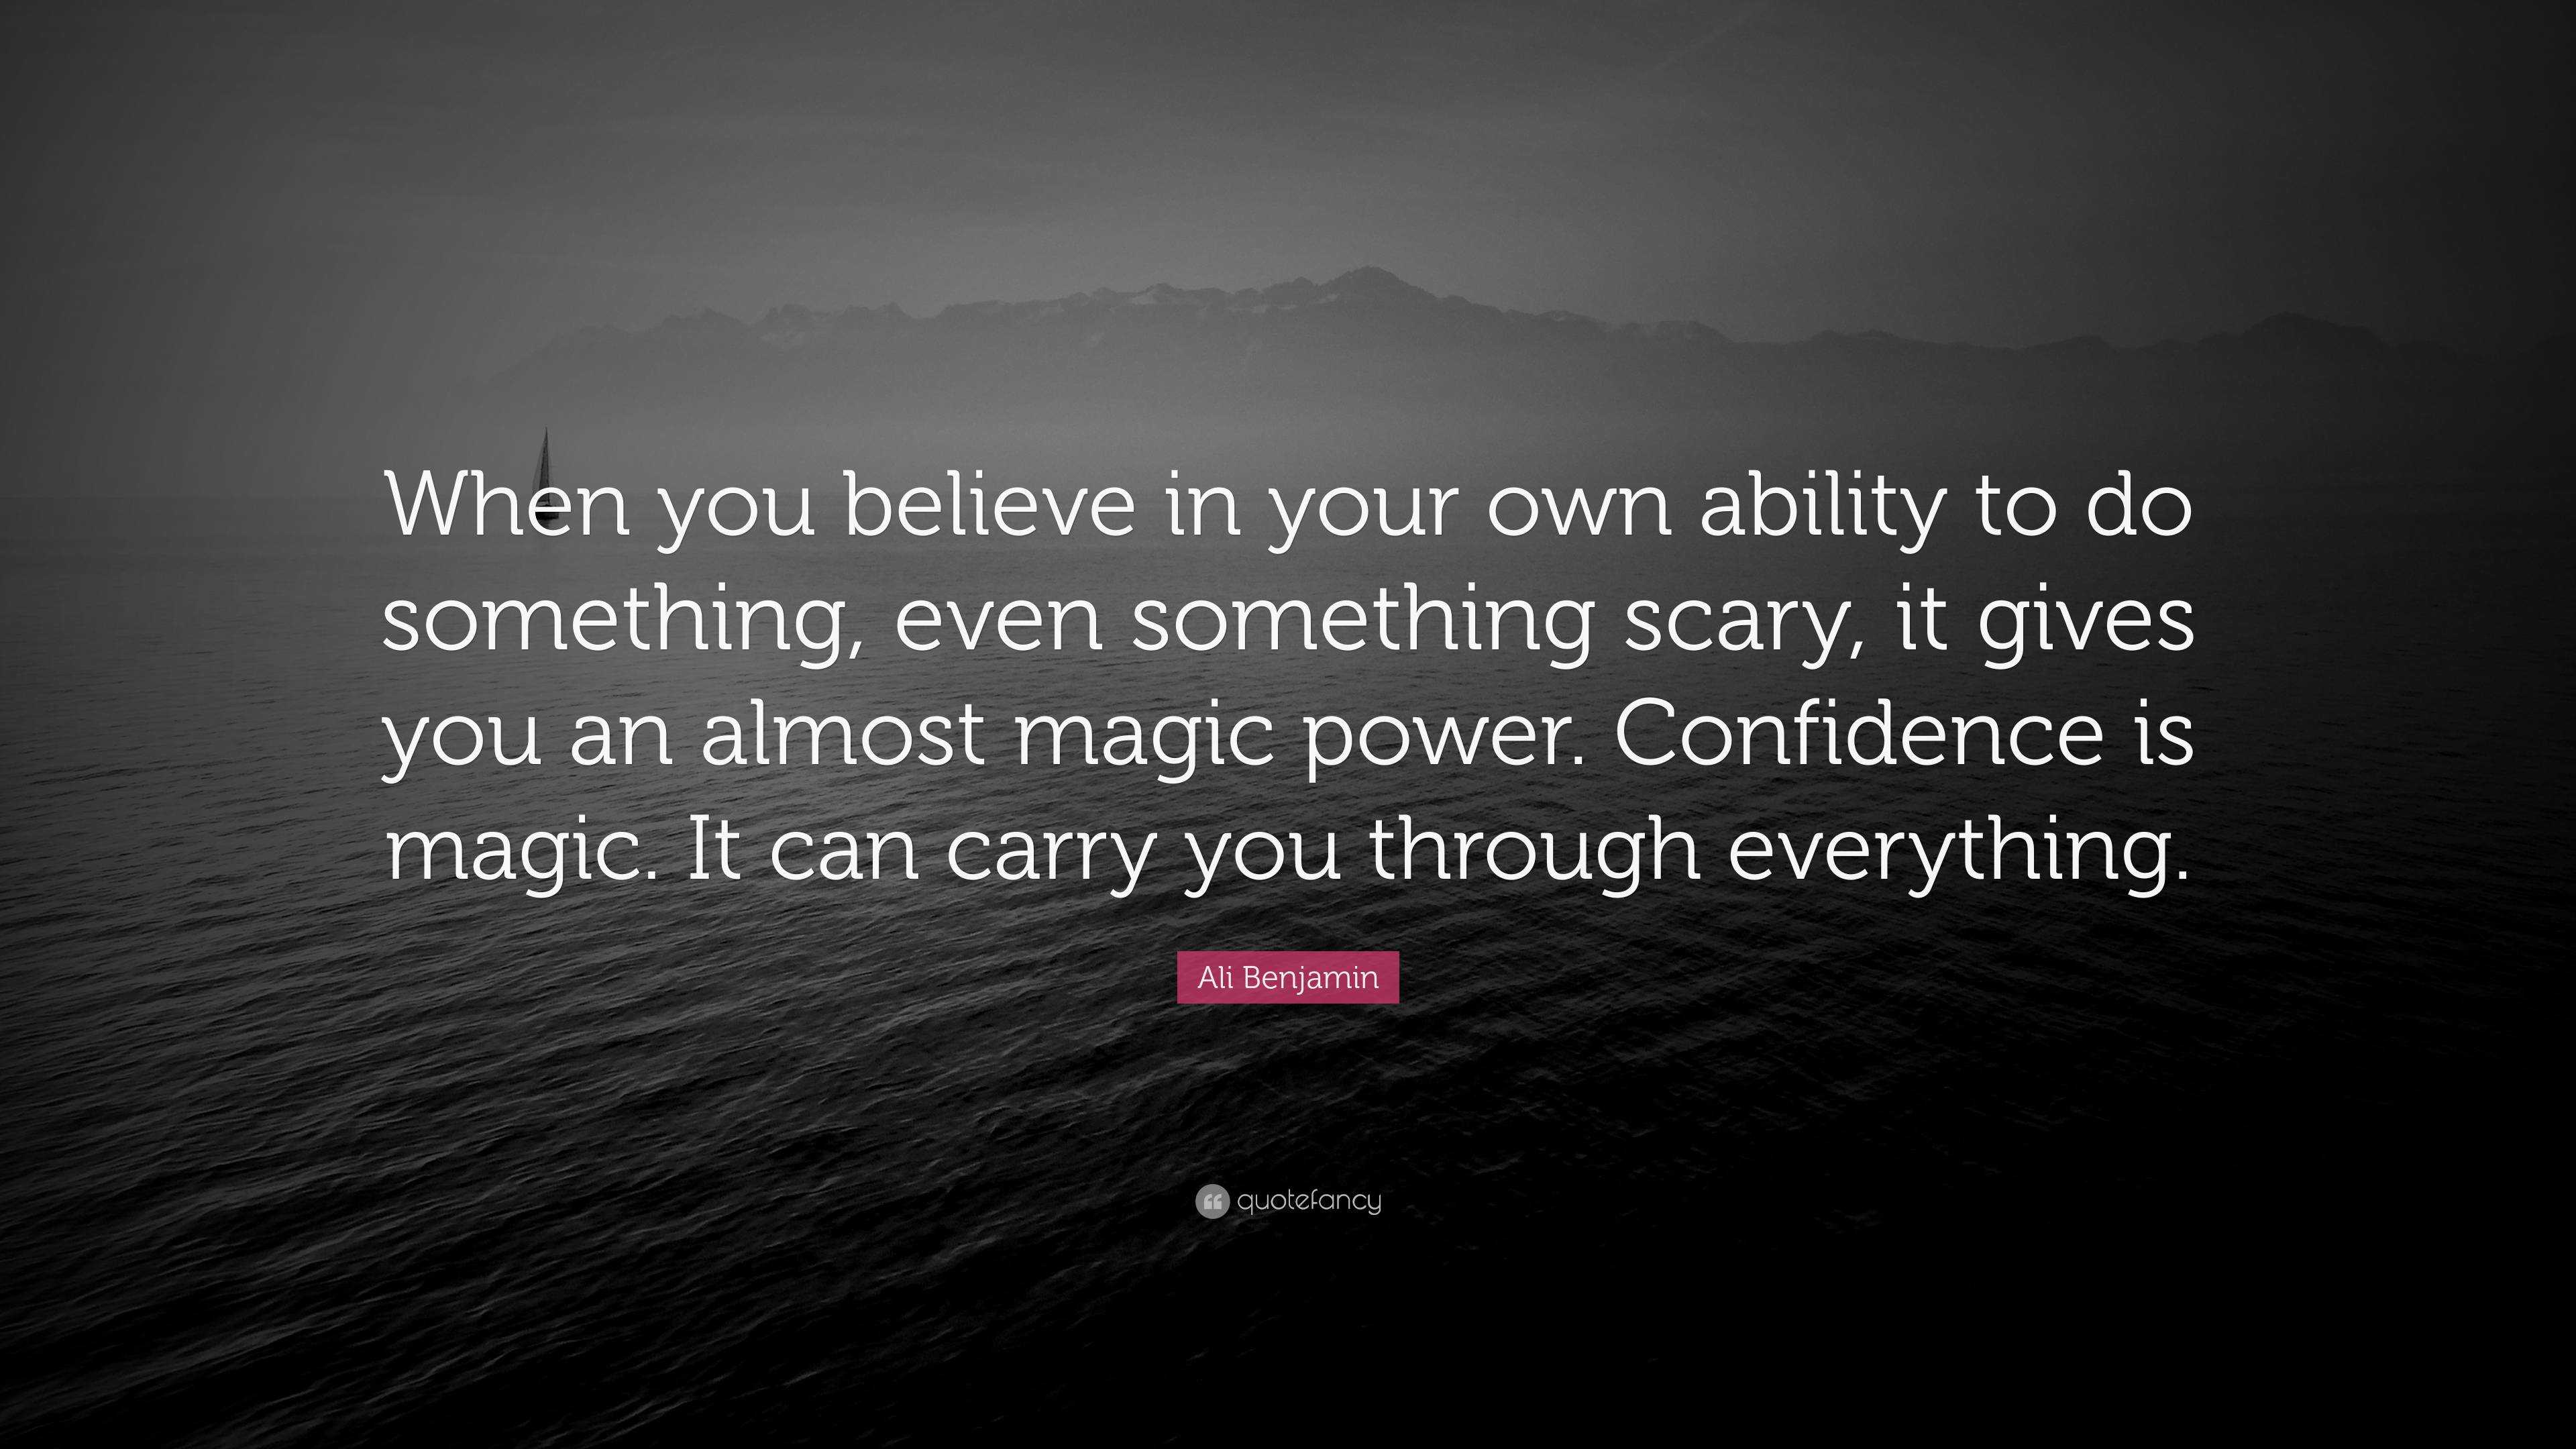 Ali Benjamin Quote: “When you believe in your own ability to do ...